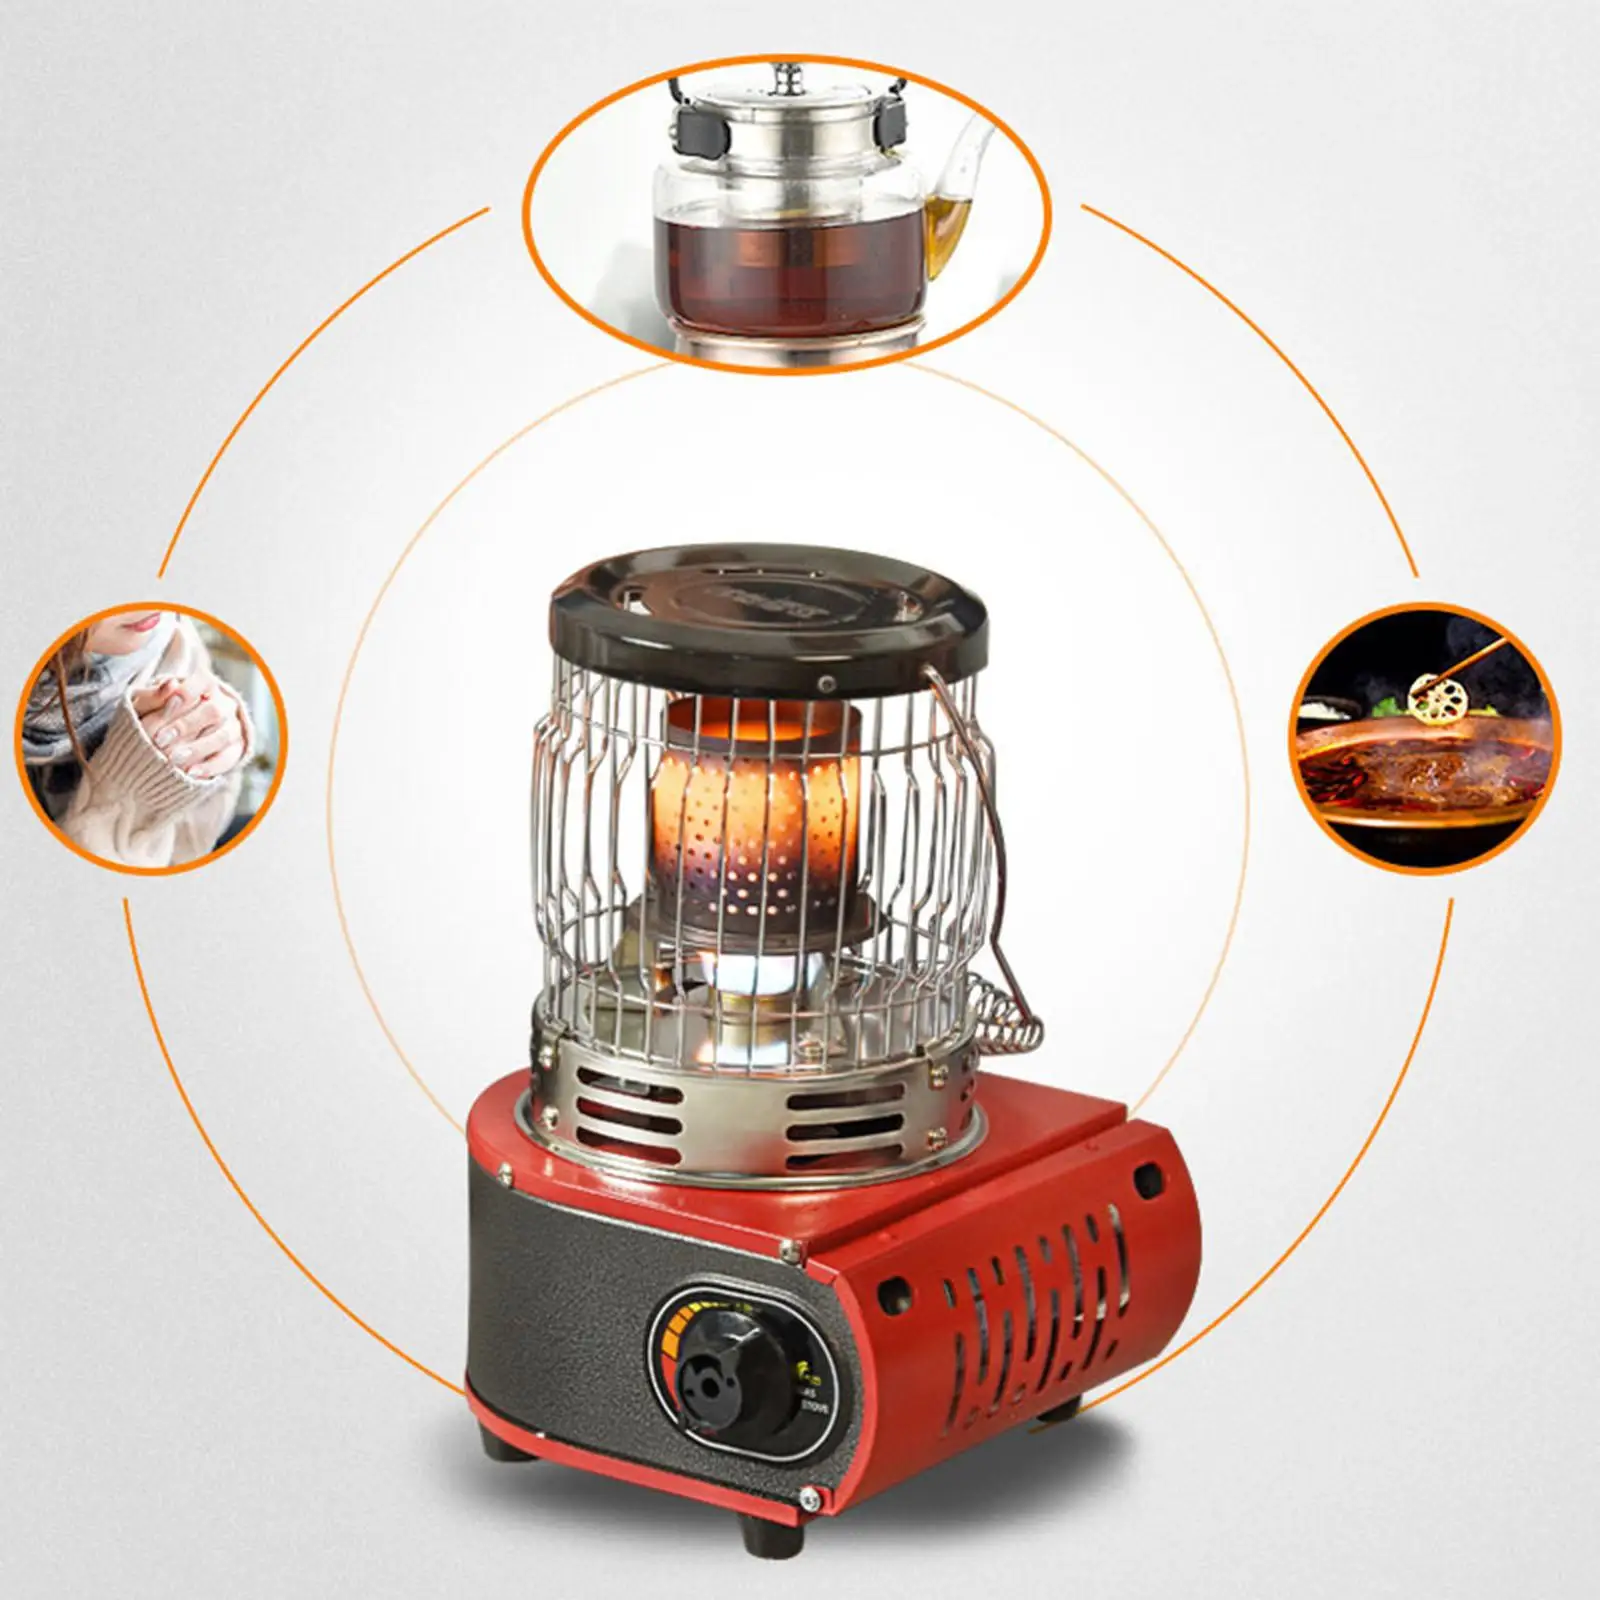 Burning Carry Stainless Portable Heater for Outdoor Camping Cooking